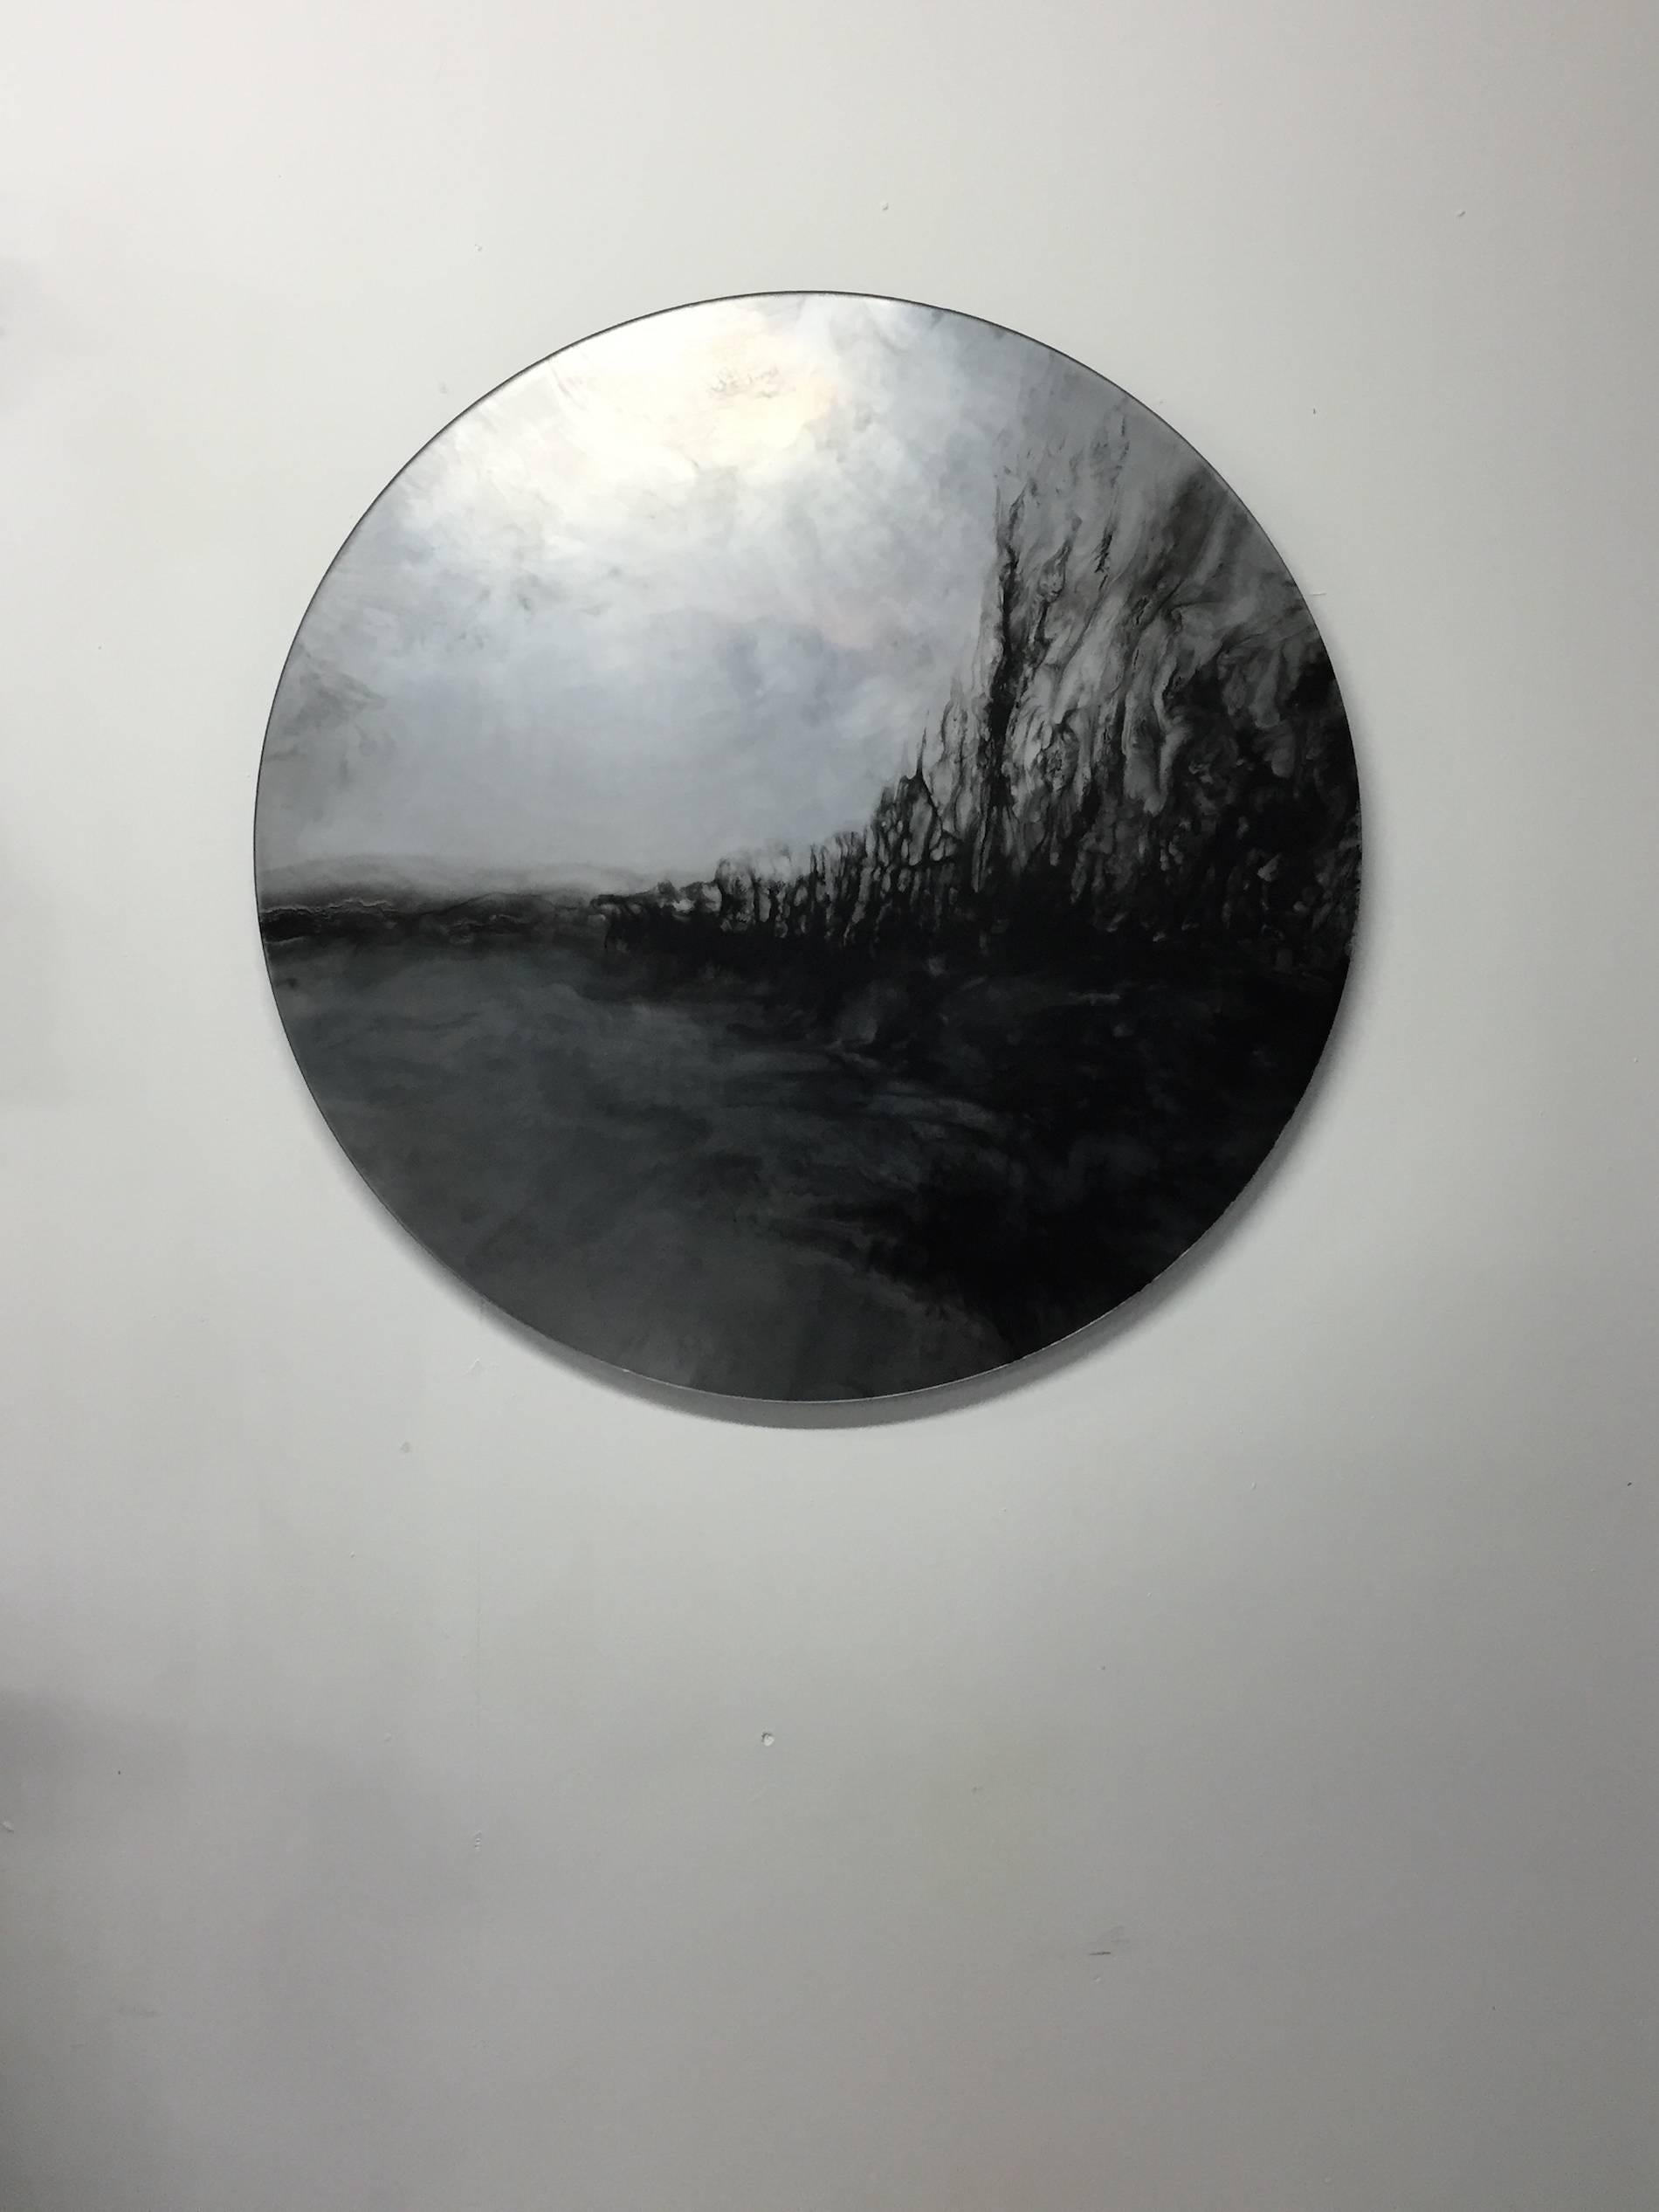 The Ether mirror is a subtly reflective piece with turbulent black clouds across its matte surface. While read first as an artwork and conversation piece it offers a Dual purpose for an interior scheme by providing an understated reflection of